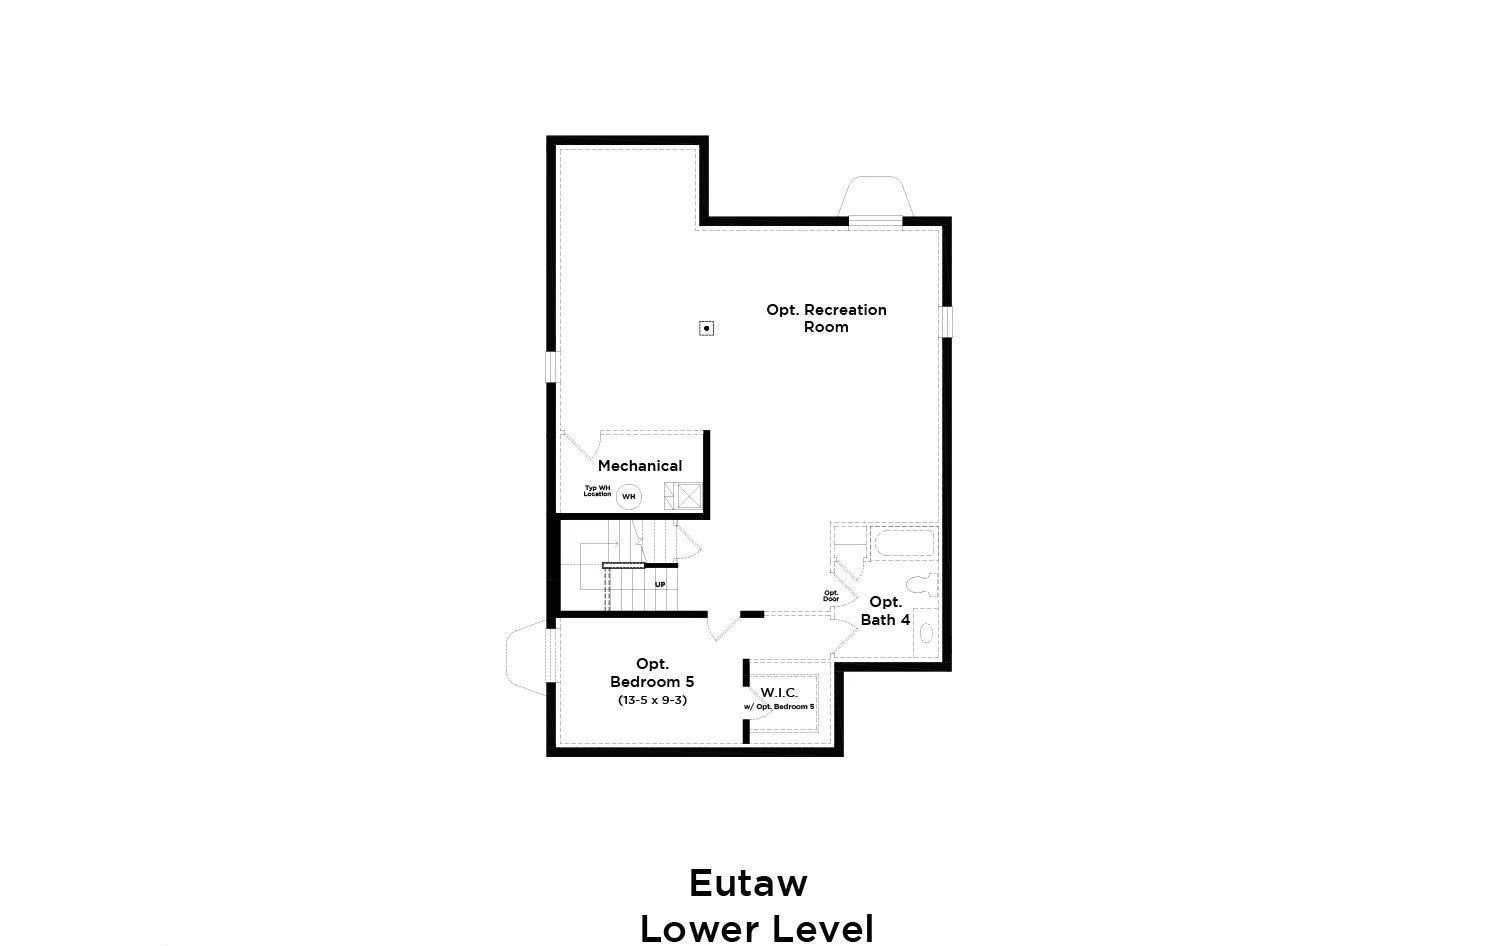 2d-house-floor-plan-drawing-lower-level